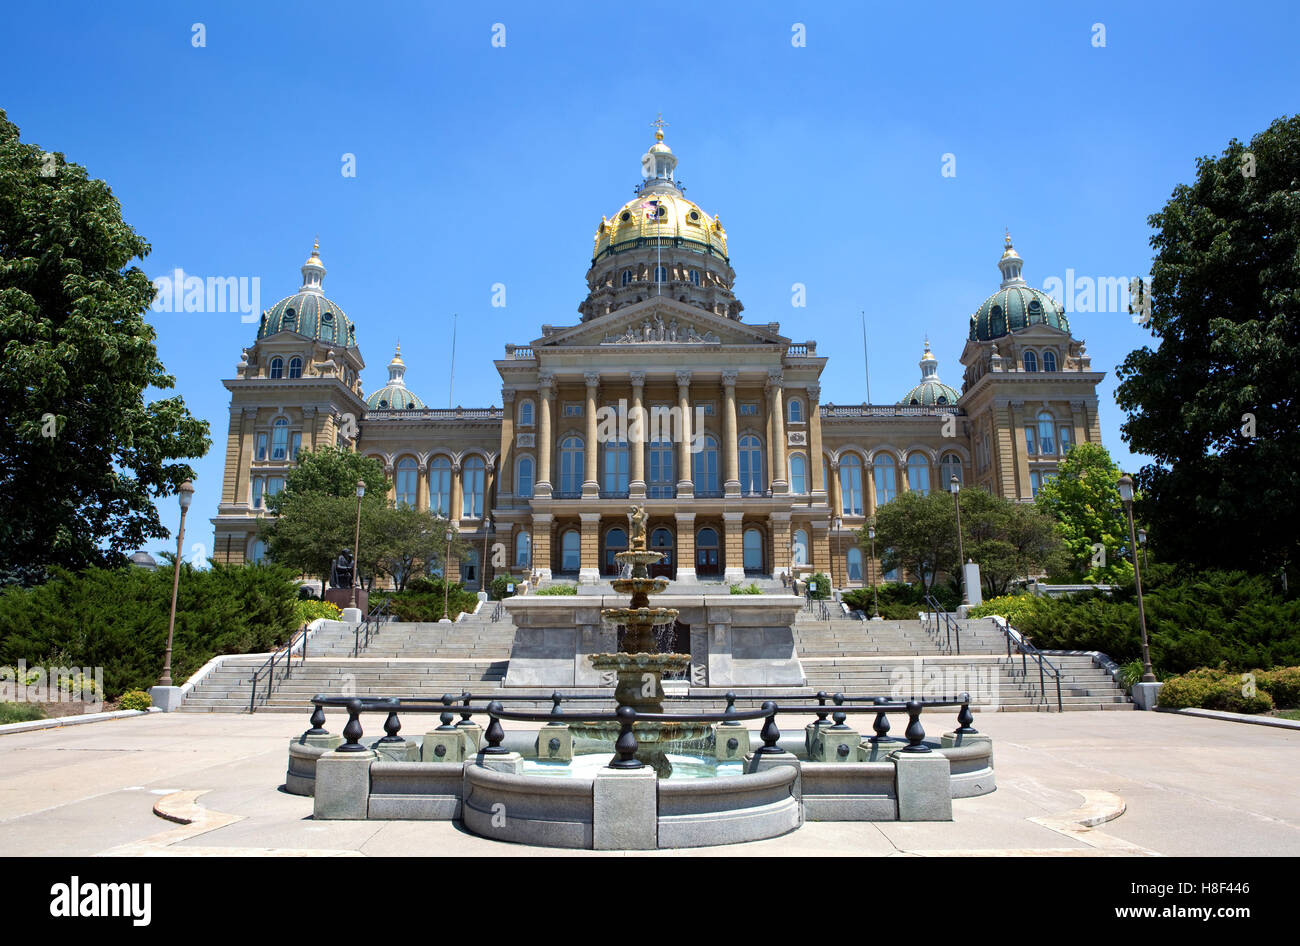 Iowa State Capitol building is located in Des Moines, IA, USA. Stock Photo